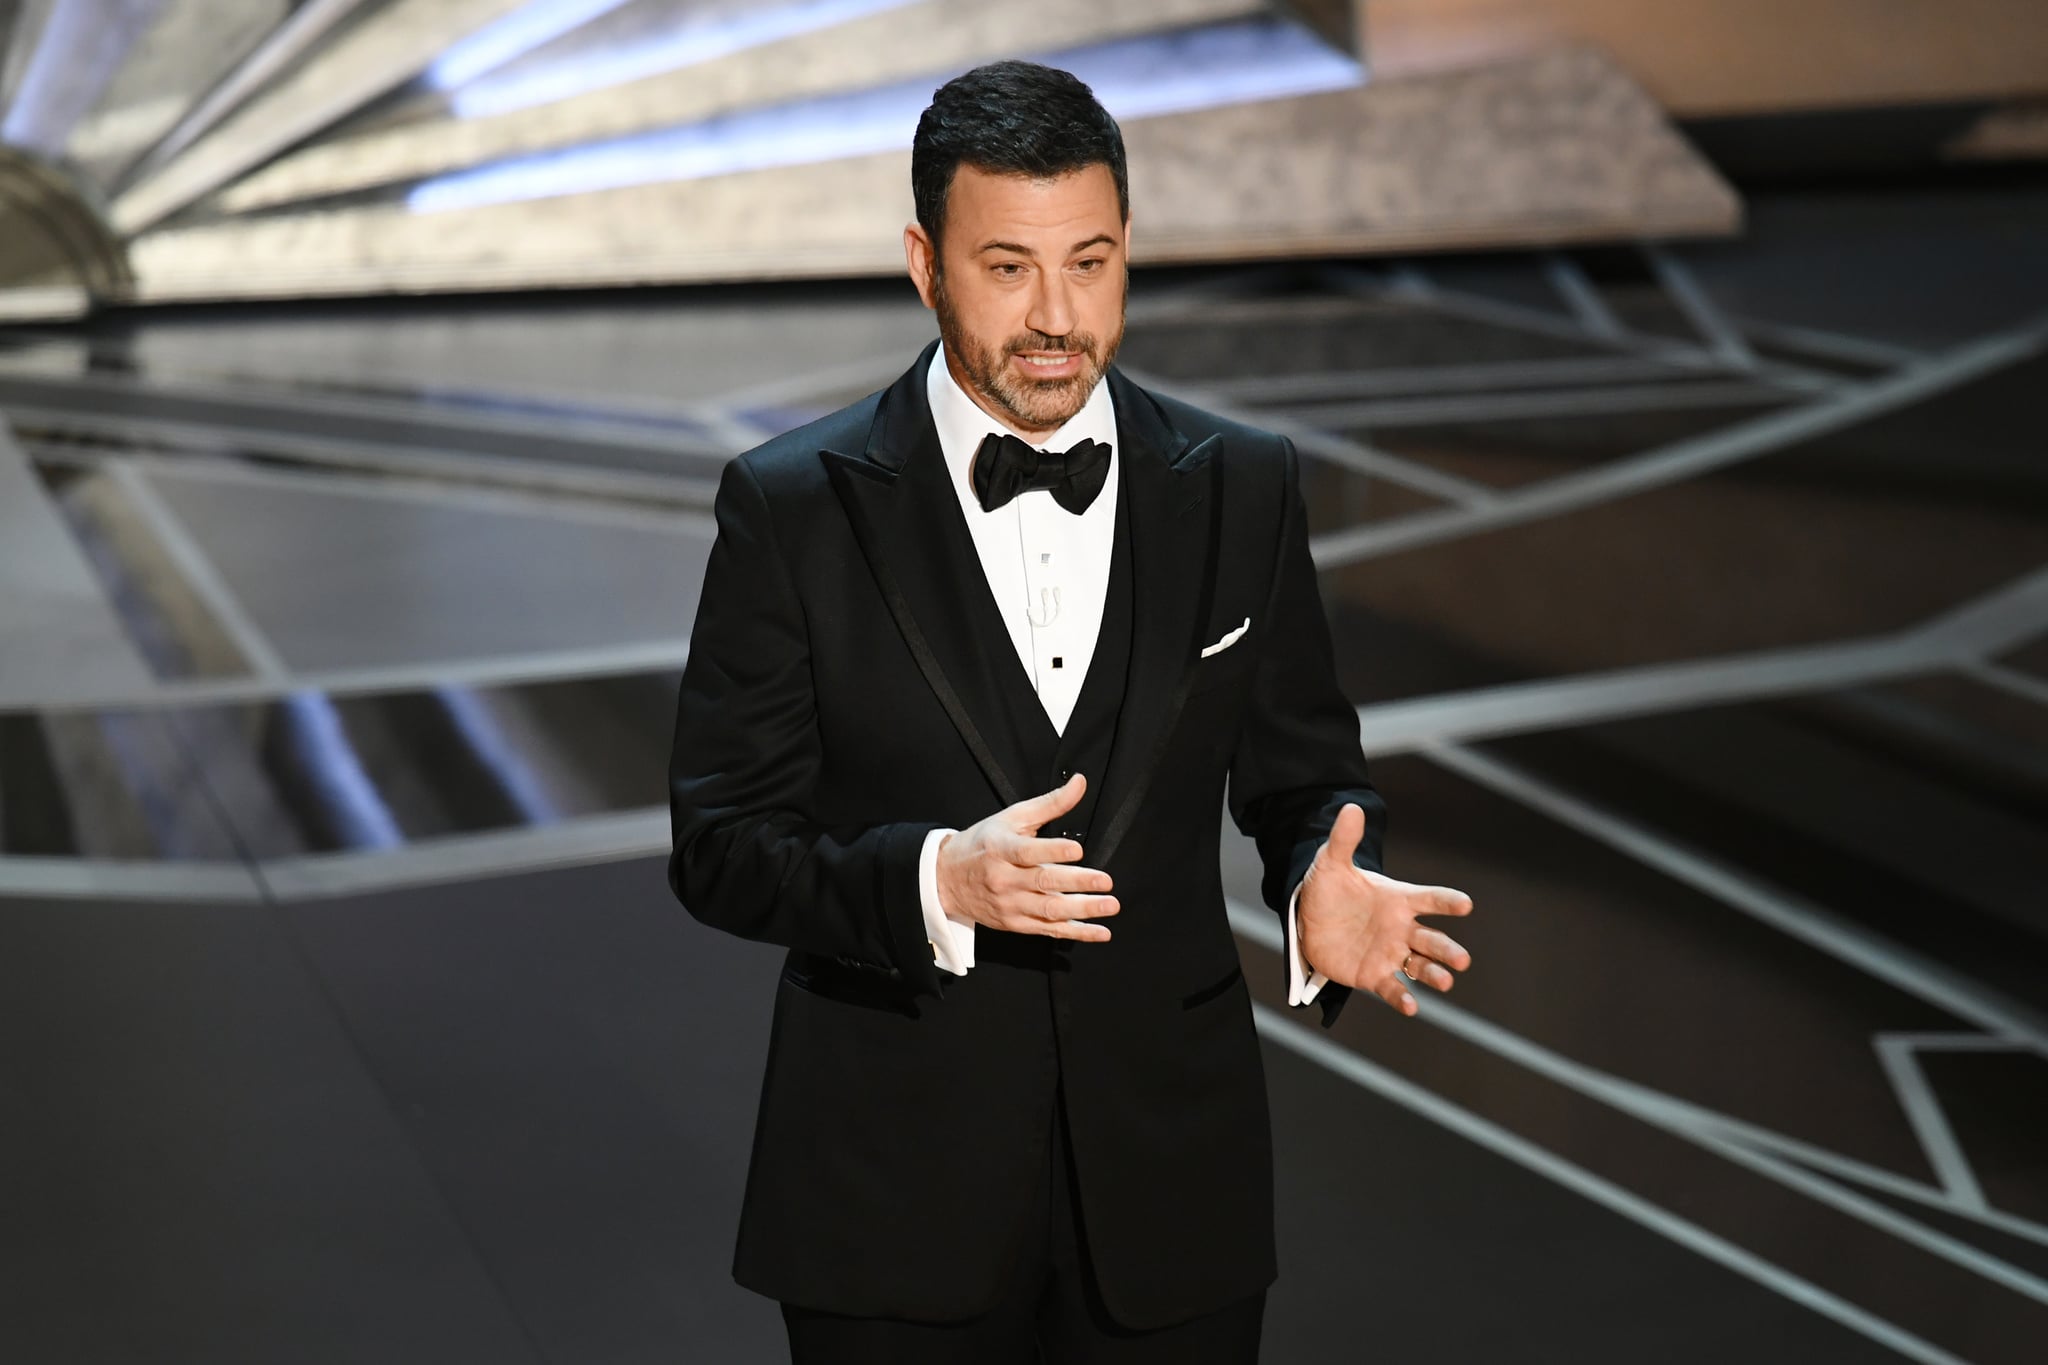 HOLLYWOOD, CA - MARCH 04:  Host Jimmy Kimmel speaks onstage during the 90th Annual Academy Awards at the Dolby Theatre at Hollywood & Highland centre on March 4, 2018 in Hollywood, California.  (Photo by Kevin Winter/Getty Images)